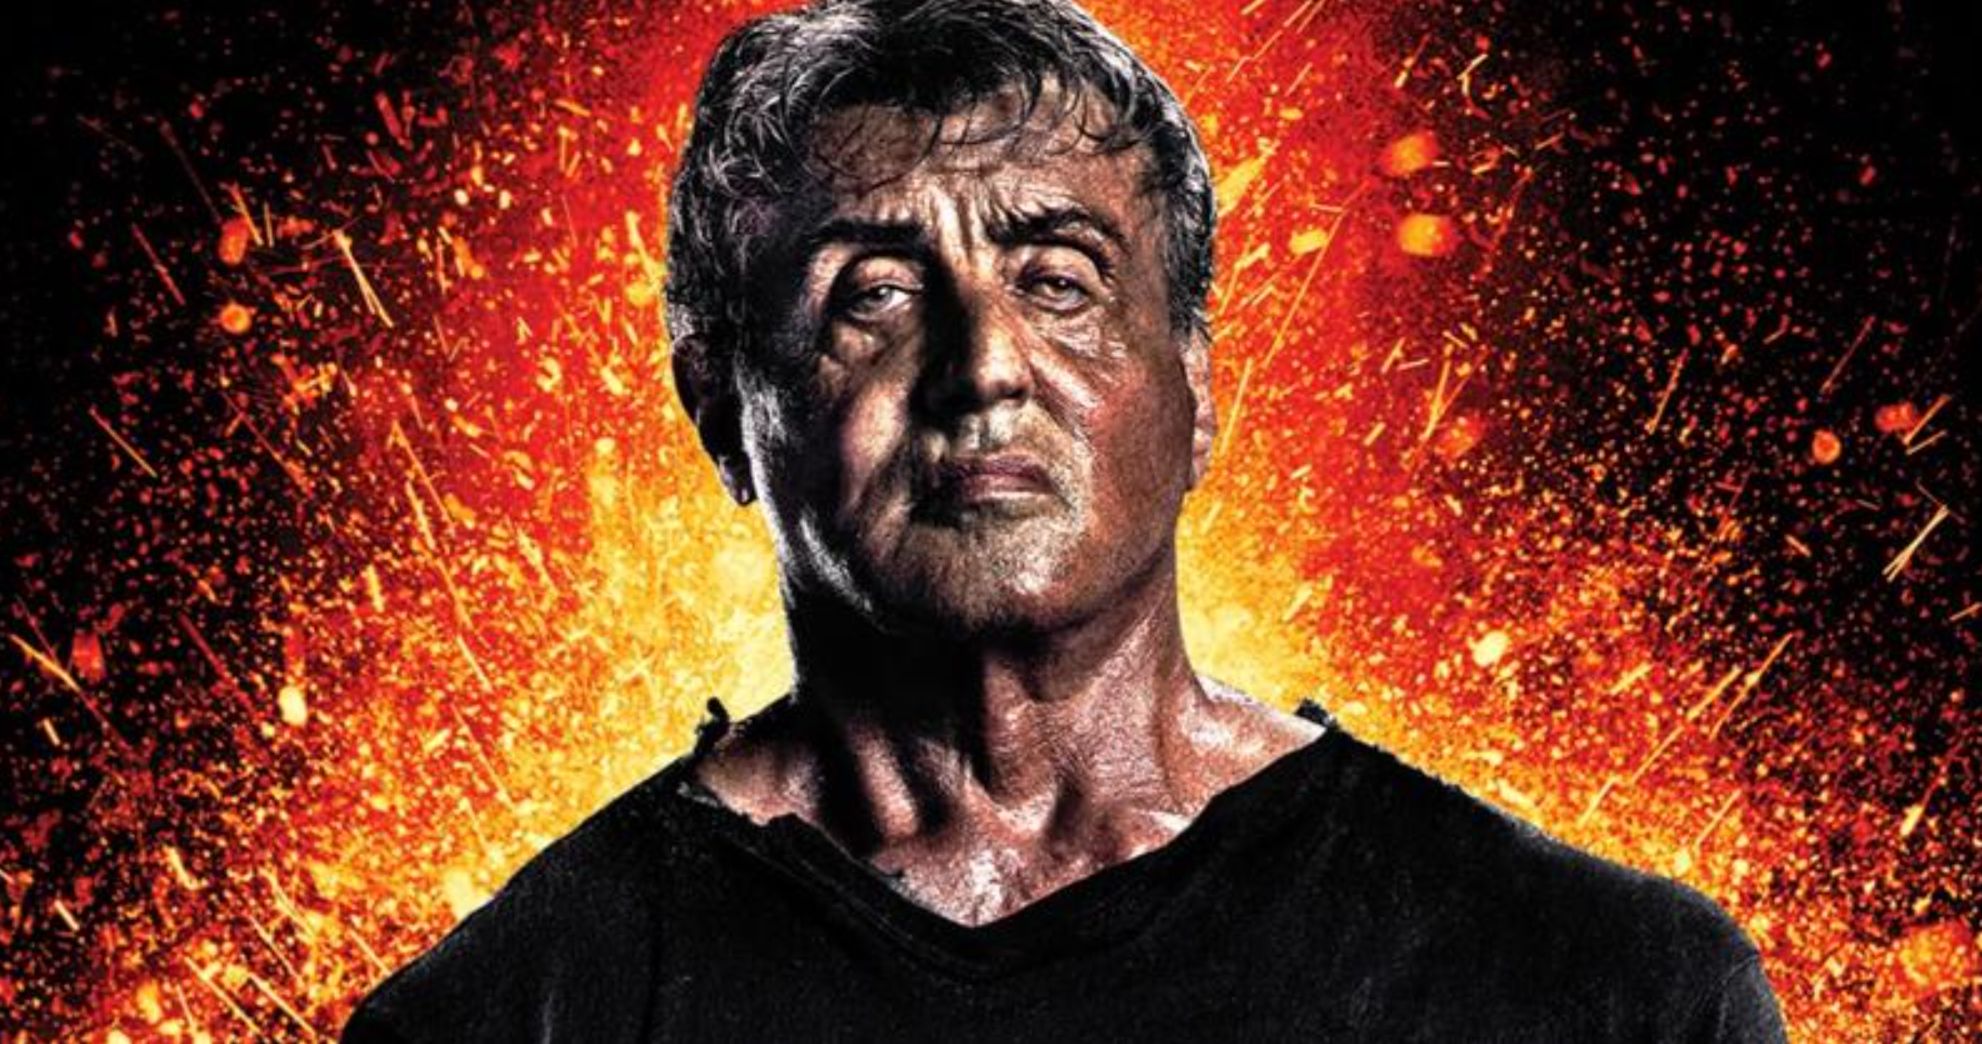 Sylvester Stallone Is Selling His $85M House, But His Home Office Is the Real Story